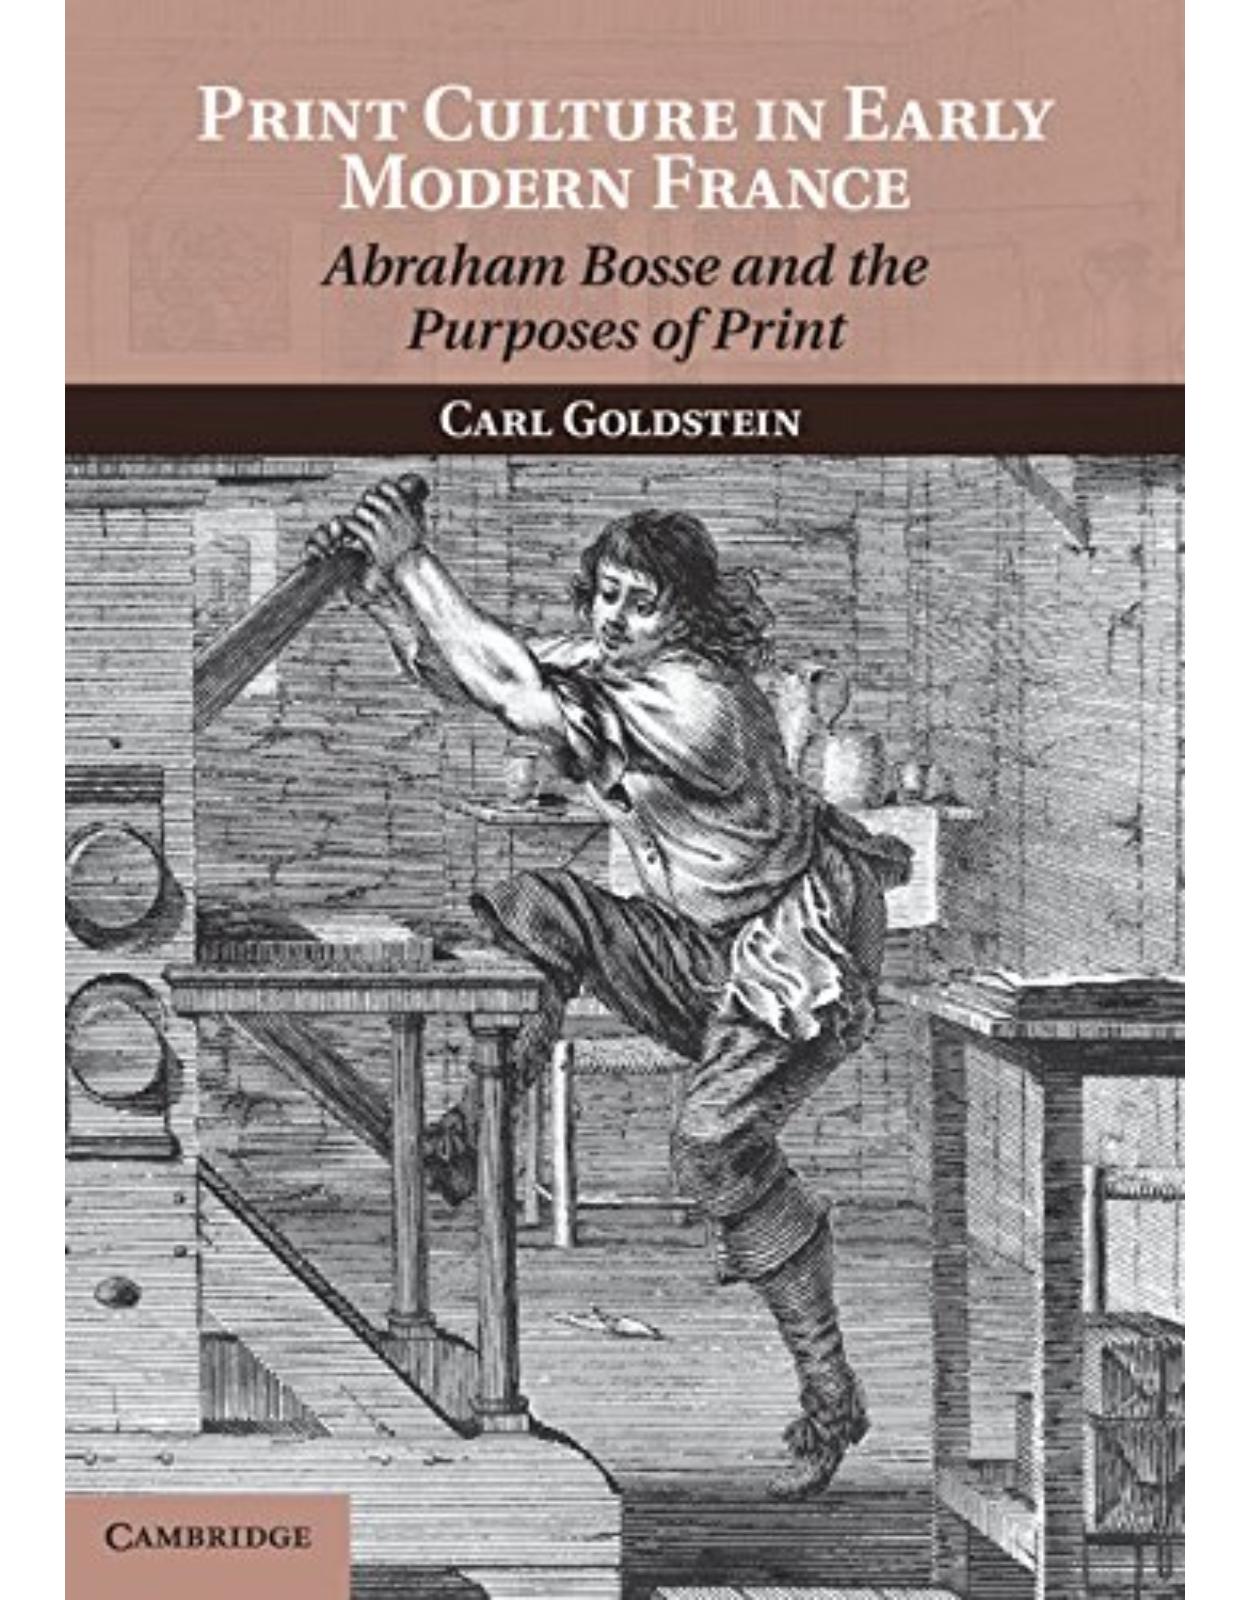 Print Culture in Early Modern France: Abraham Bosse and the Purposes of Print